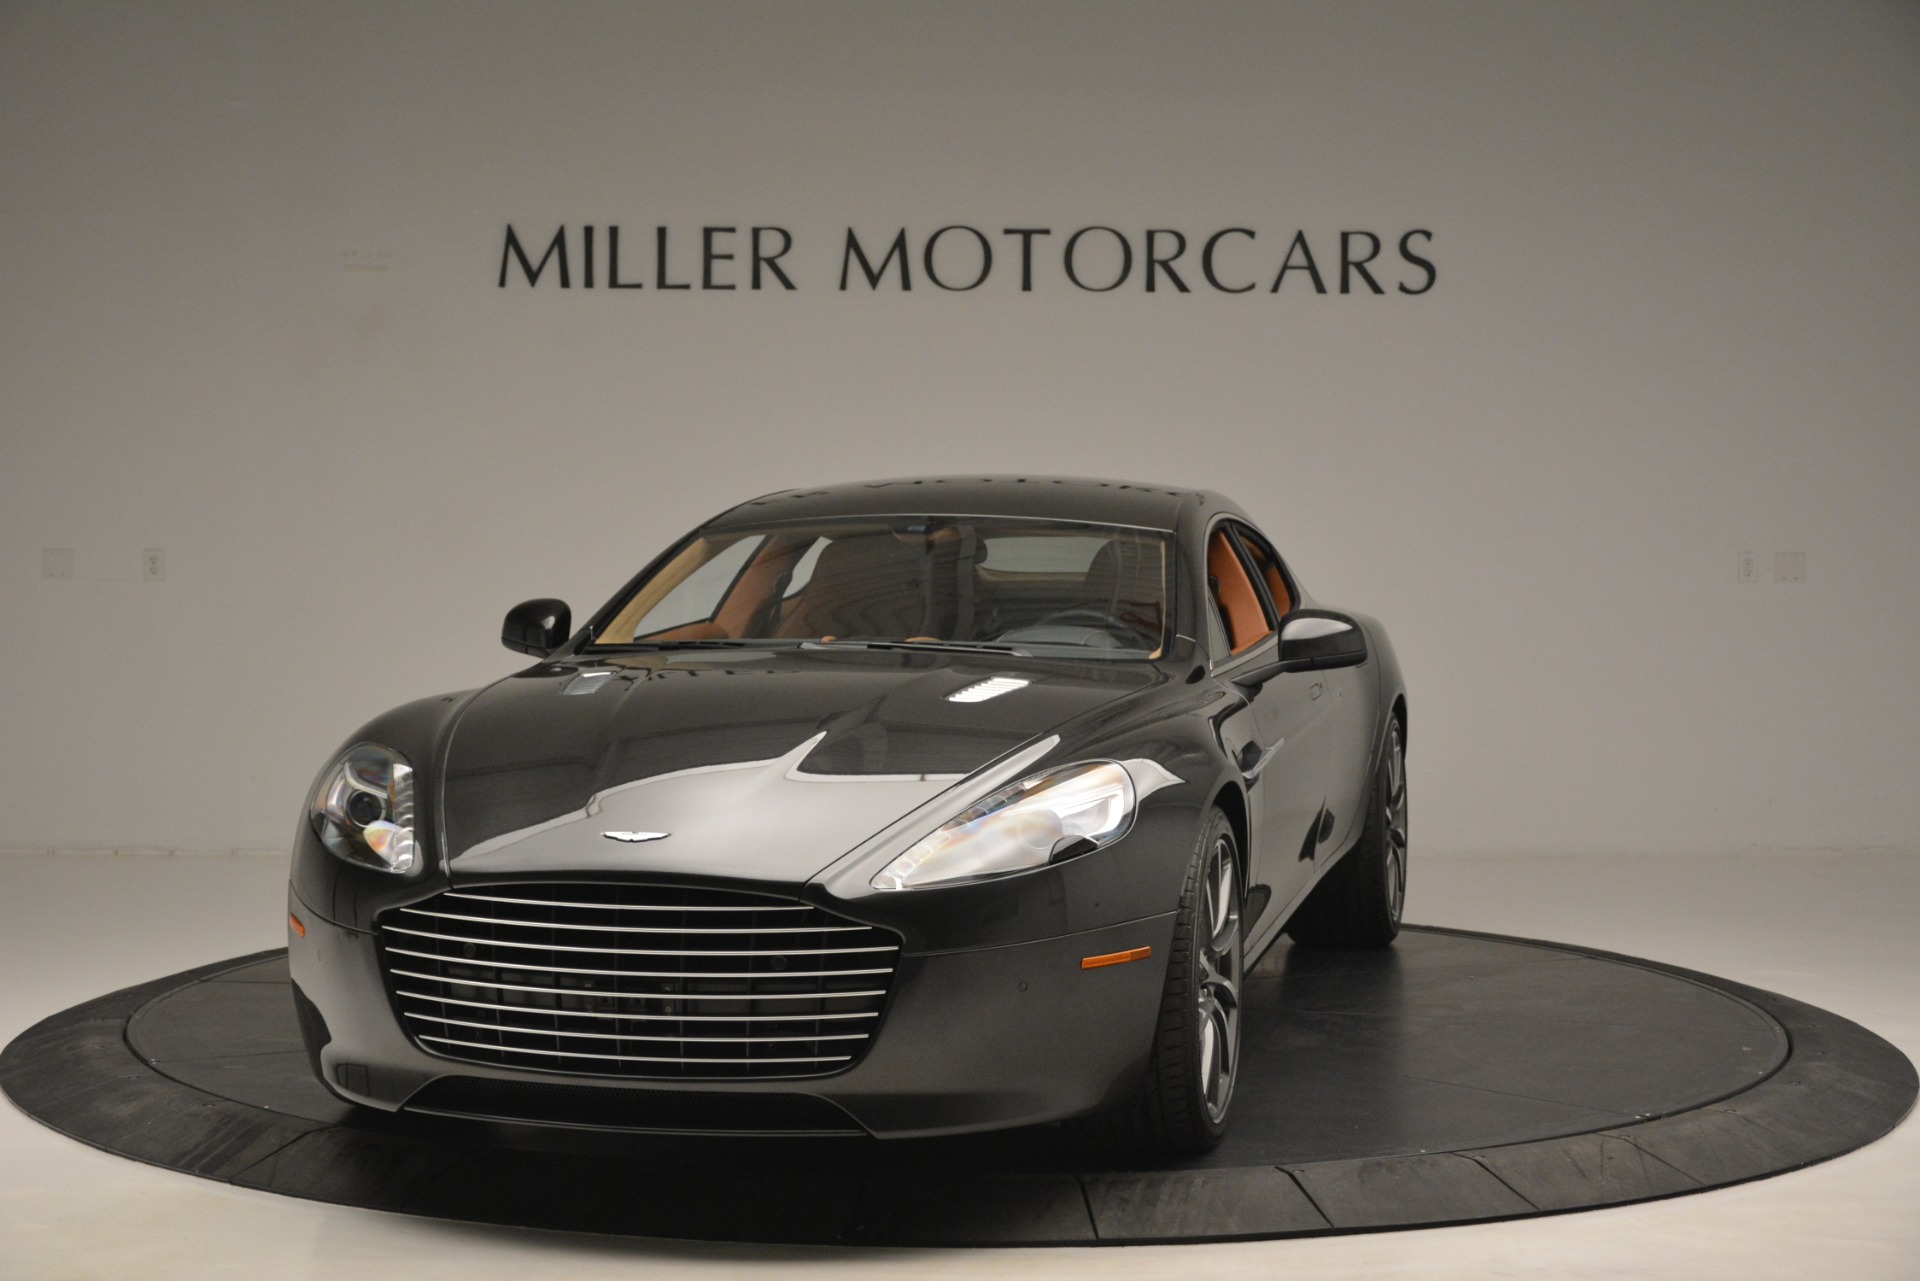 Used 2016 Aston Martin Rapide S for sale Sold at Pagani of Greenwich in Greenwich CT 06830 1